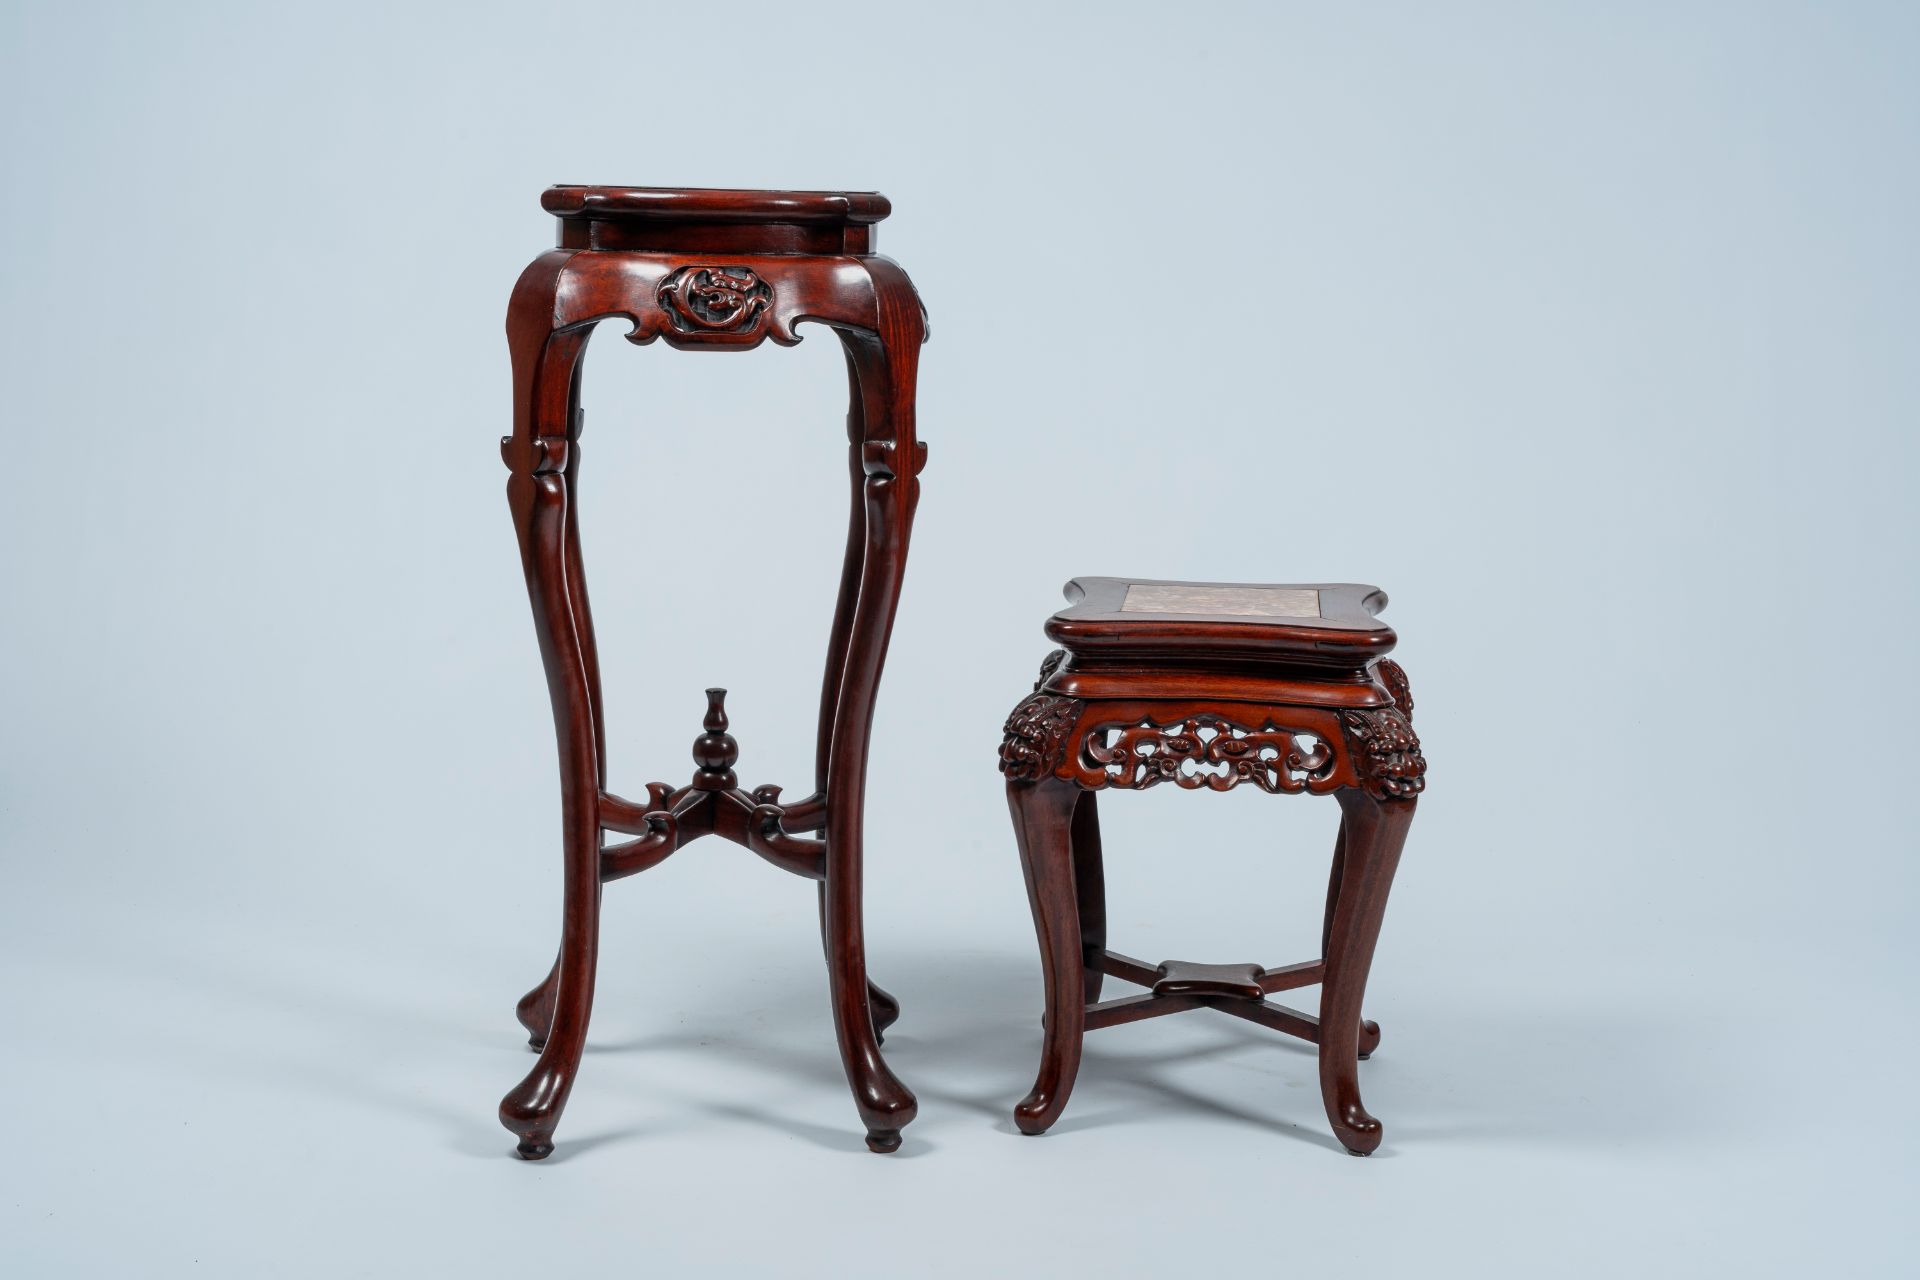 Two Chinese open worked carved wood stands with marble and dreamstone top, 20th C. - Image 2 of 7